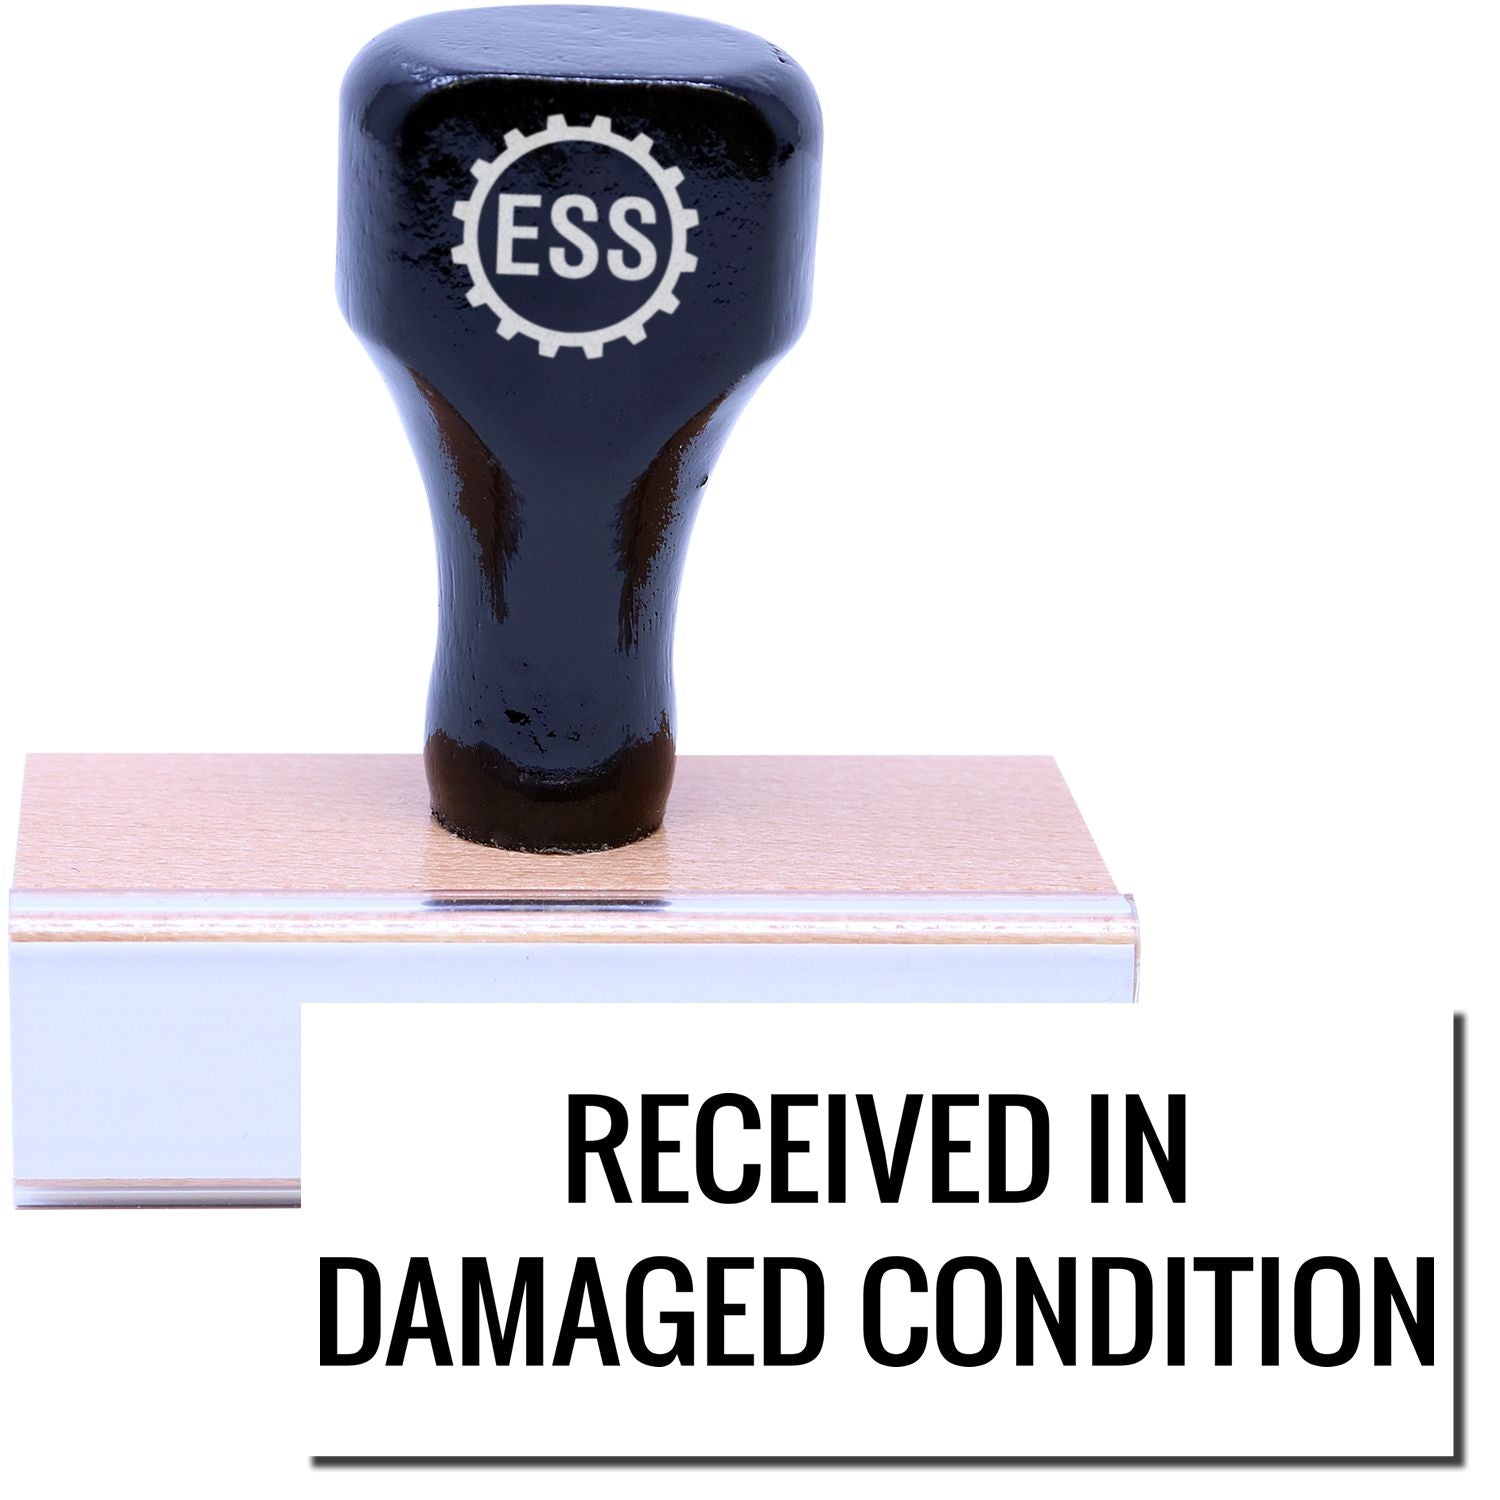 A stock office rubber stamp with a stamped image showing how the text "RECEIVED IN DAMAGED CONDITION" is displayed after stamping.